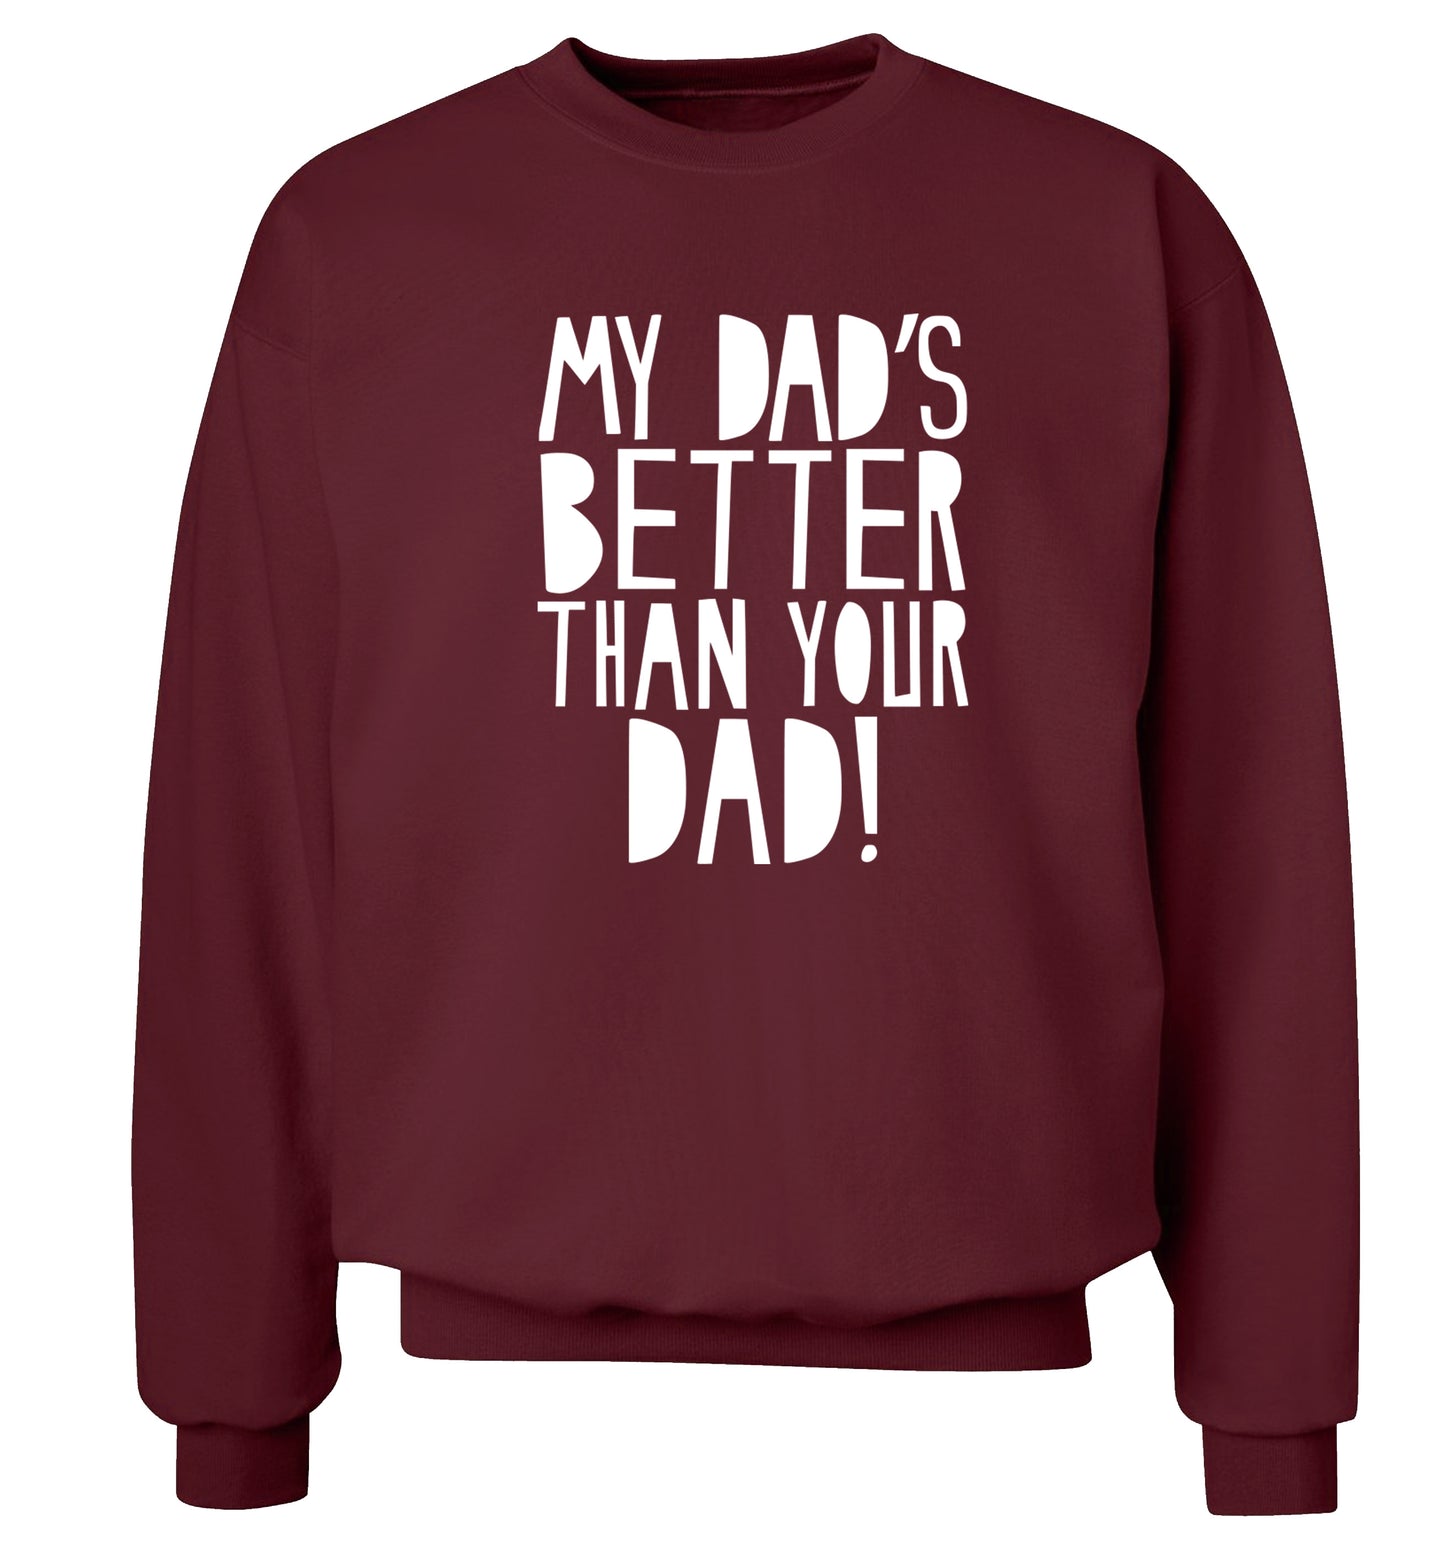 My dad's better than your dad Adult's unisex maroon Sweater 2XL